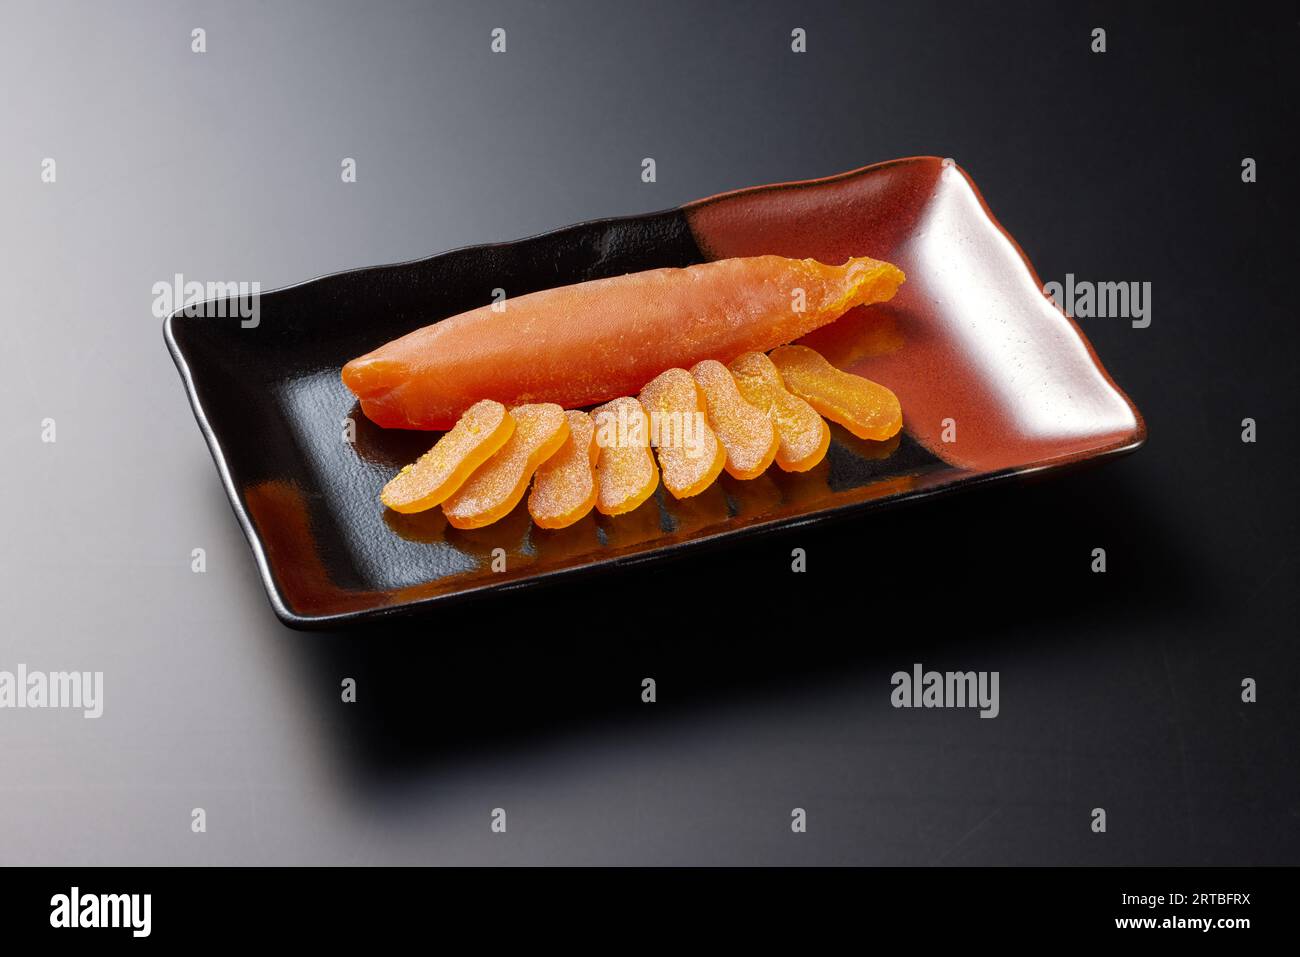 Japanese style appetizers Stock Photo